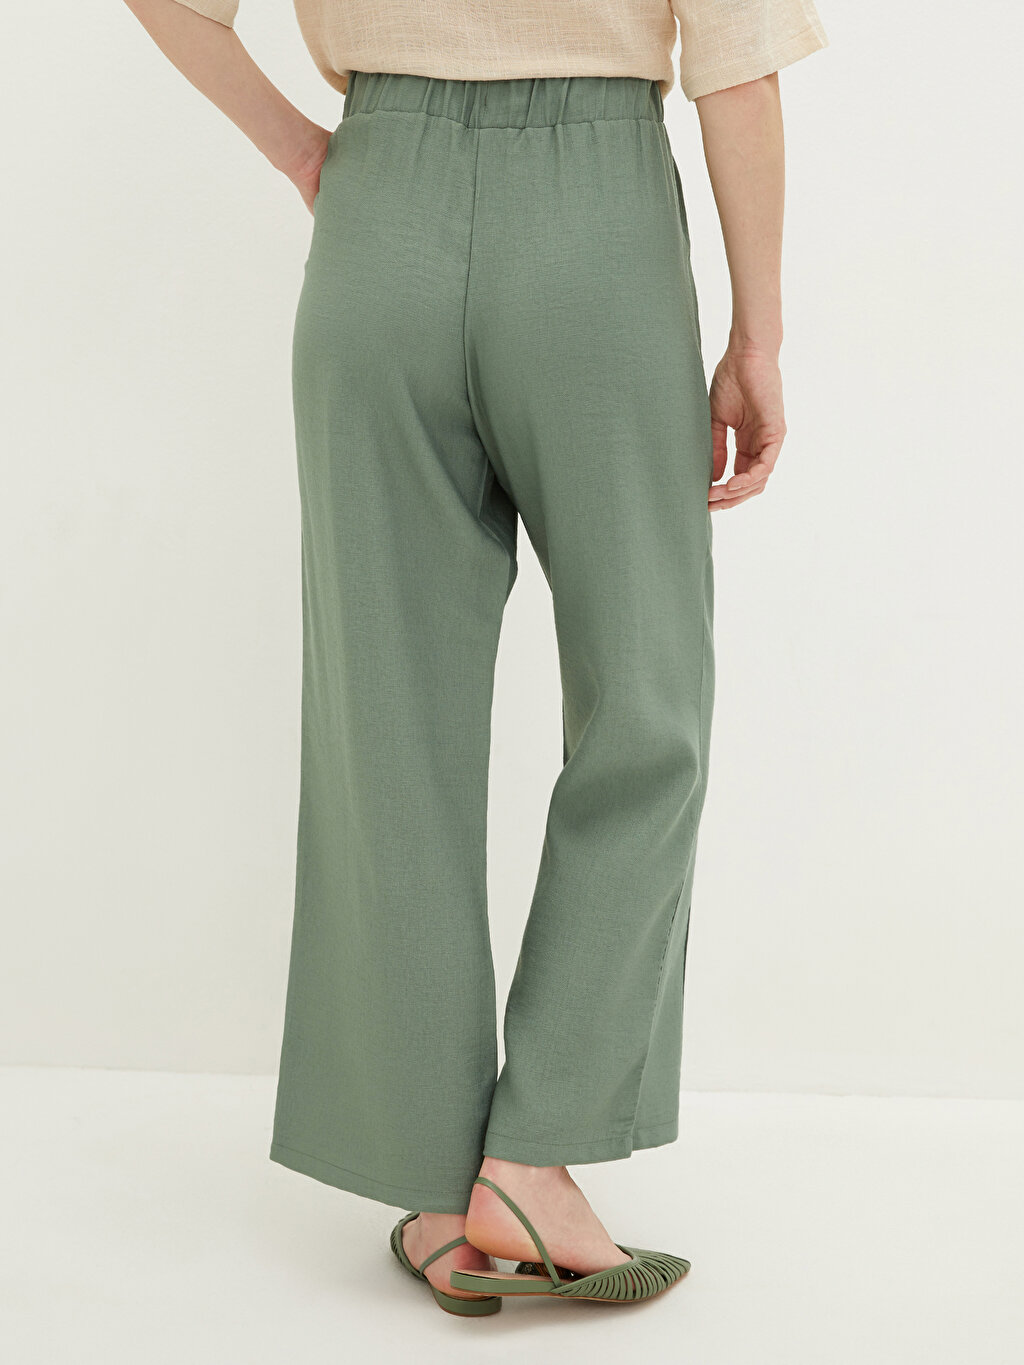 Tencel and modal stretch jogging pant loosefit elastic waistband wit   Transit